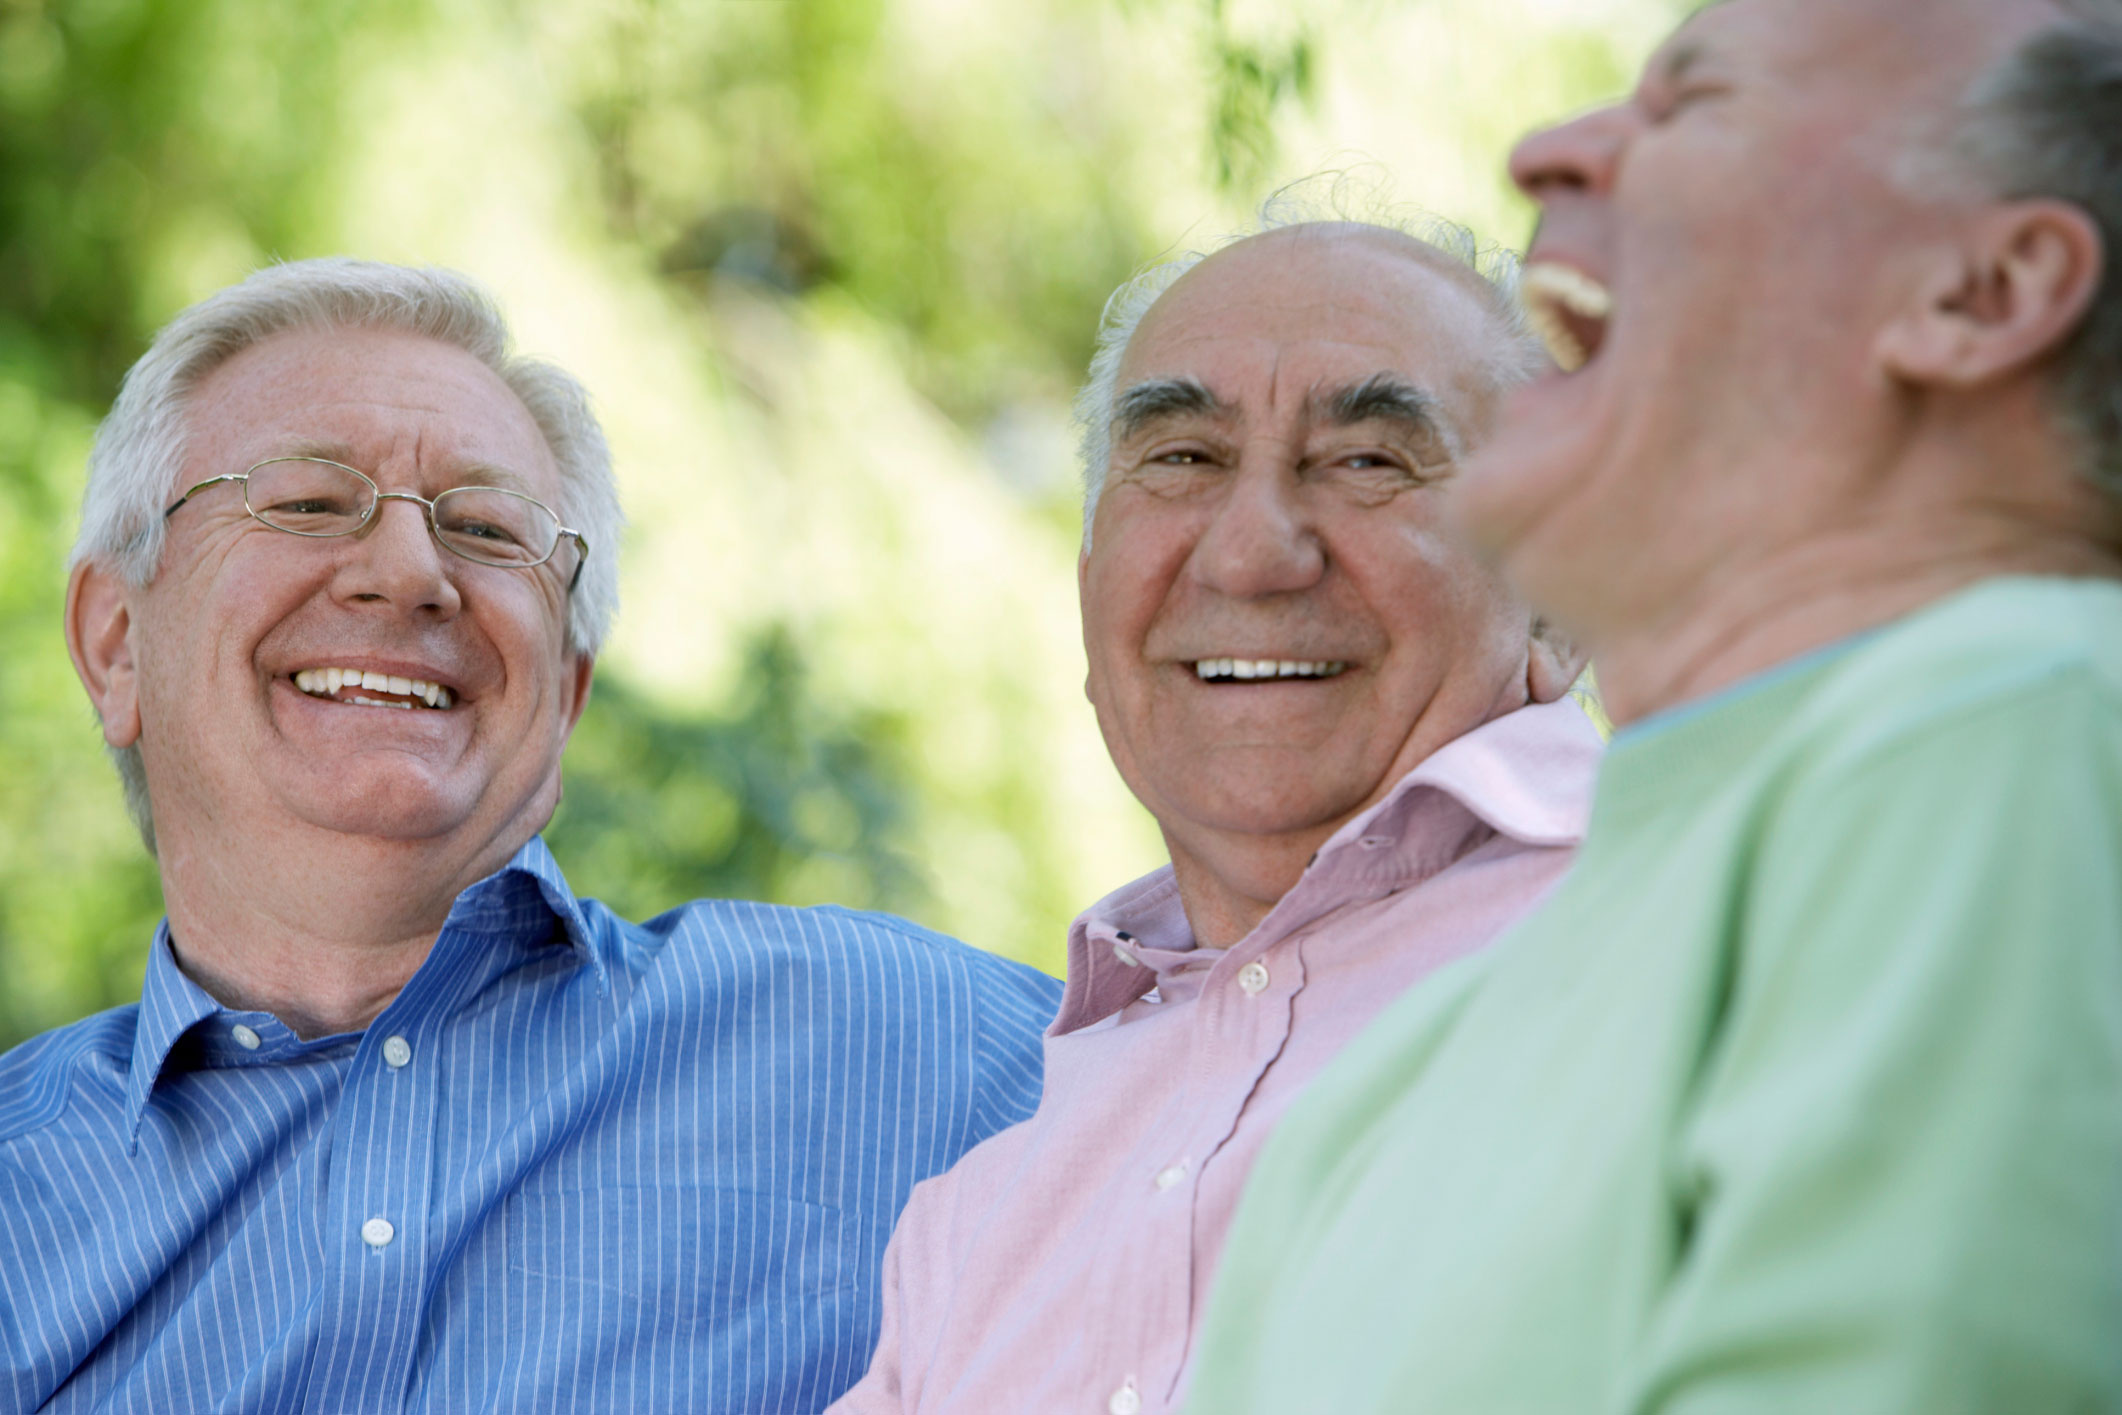 Hormonal therapy tested in older men.